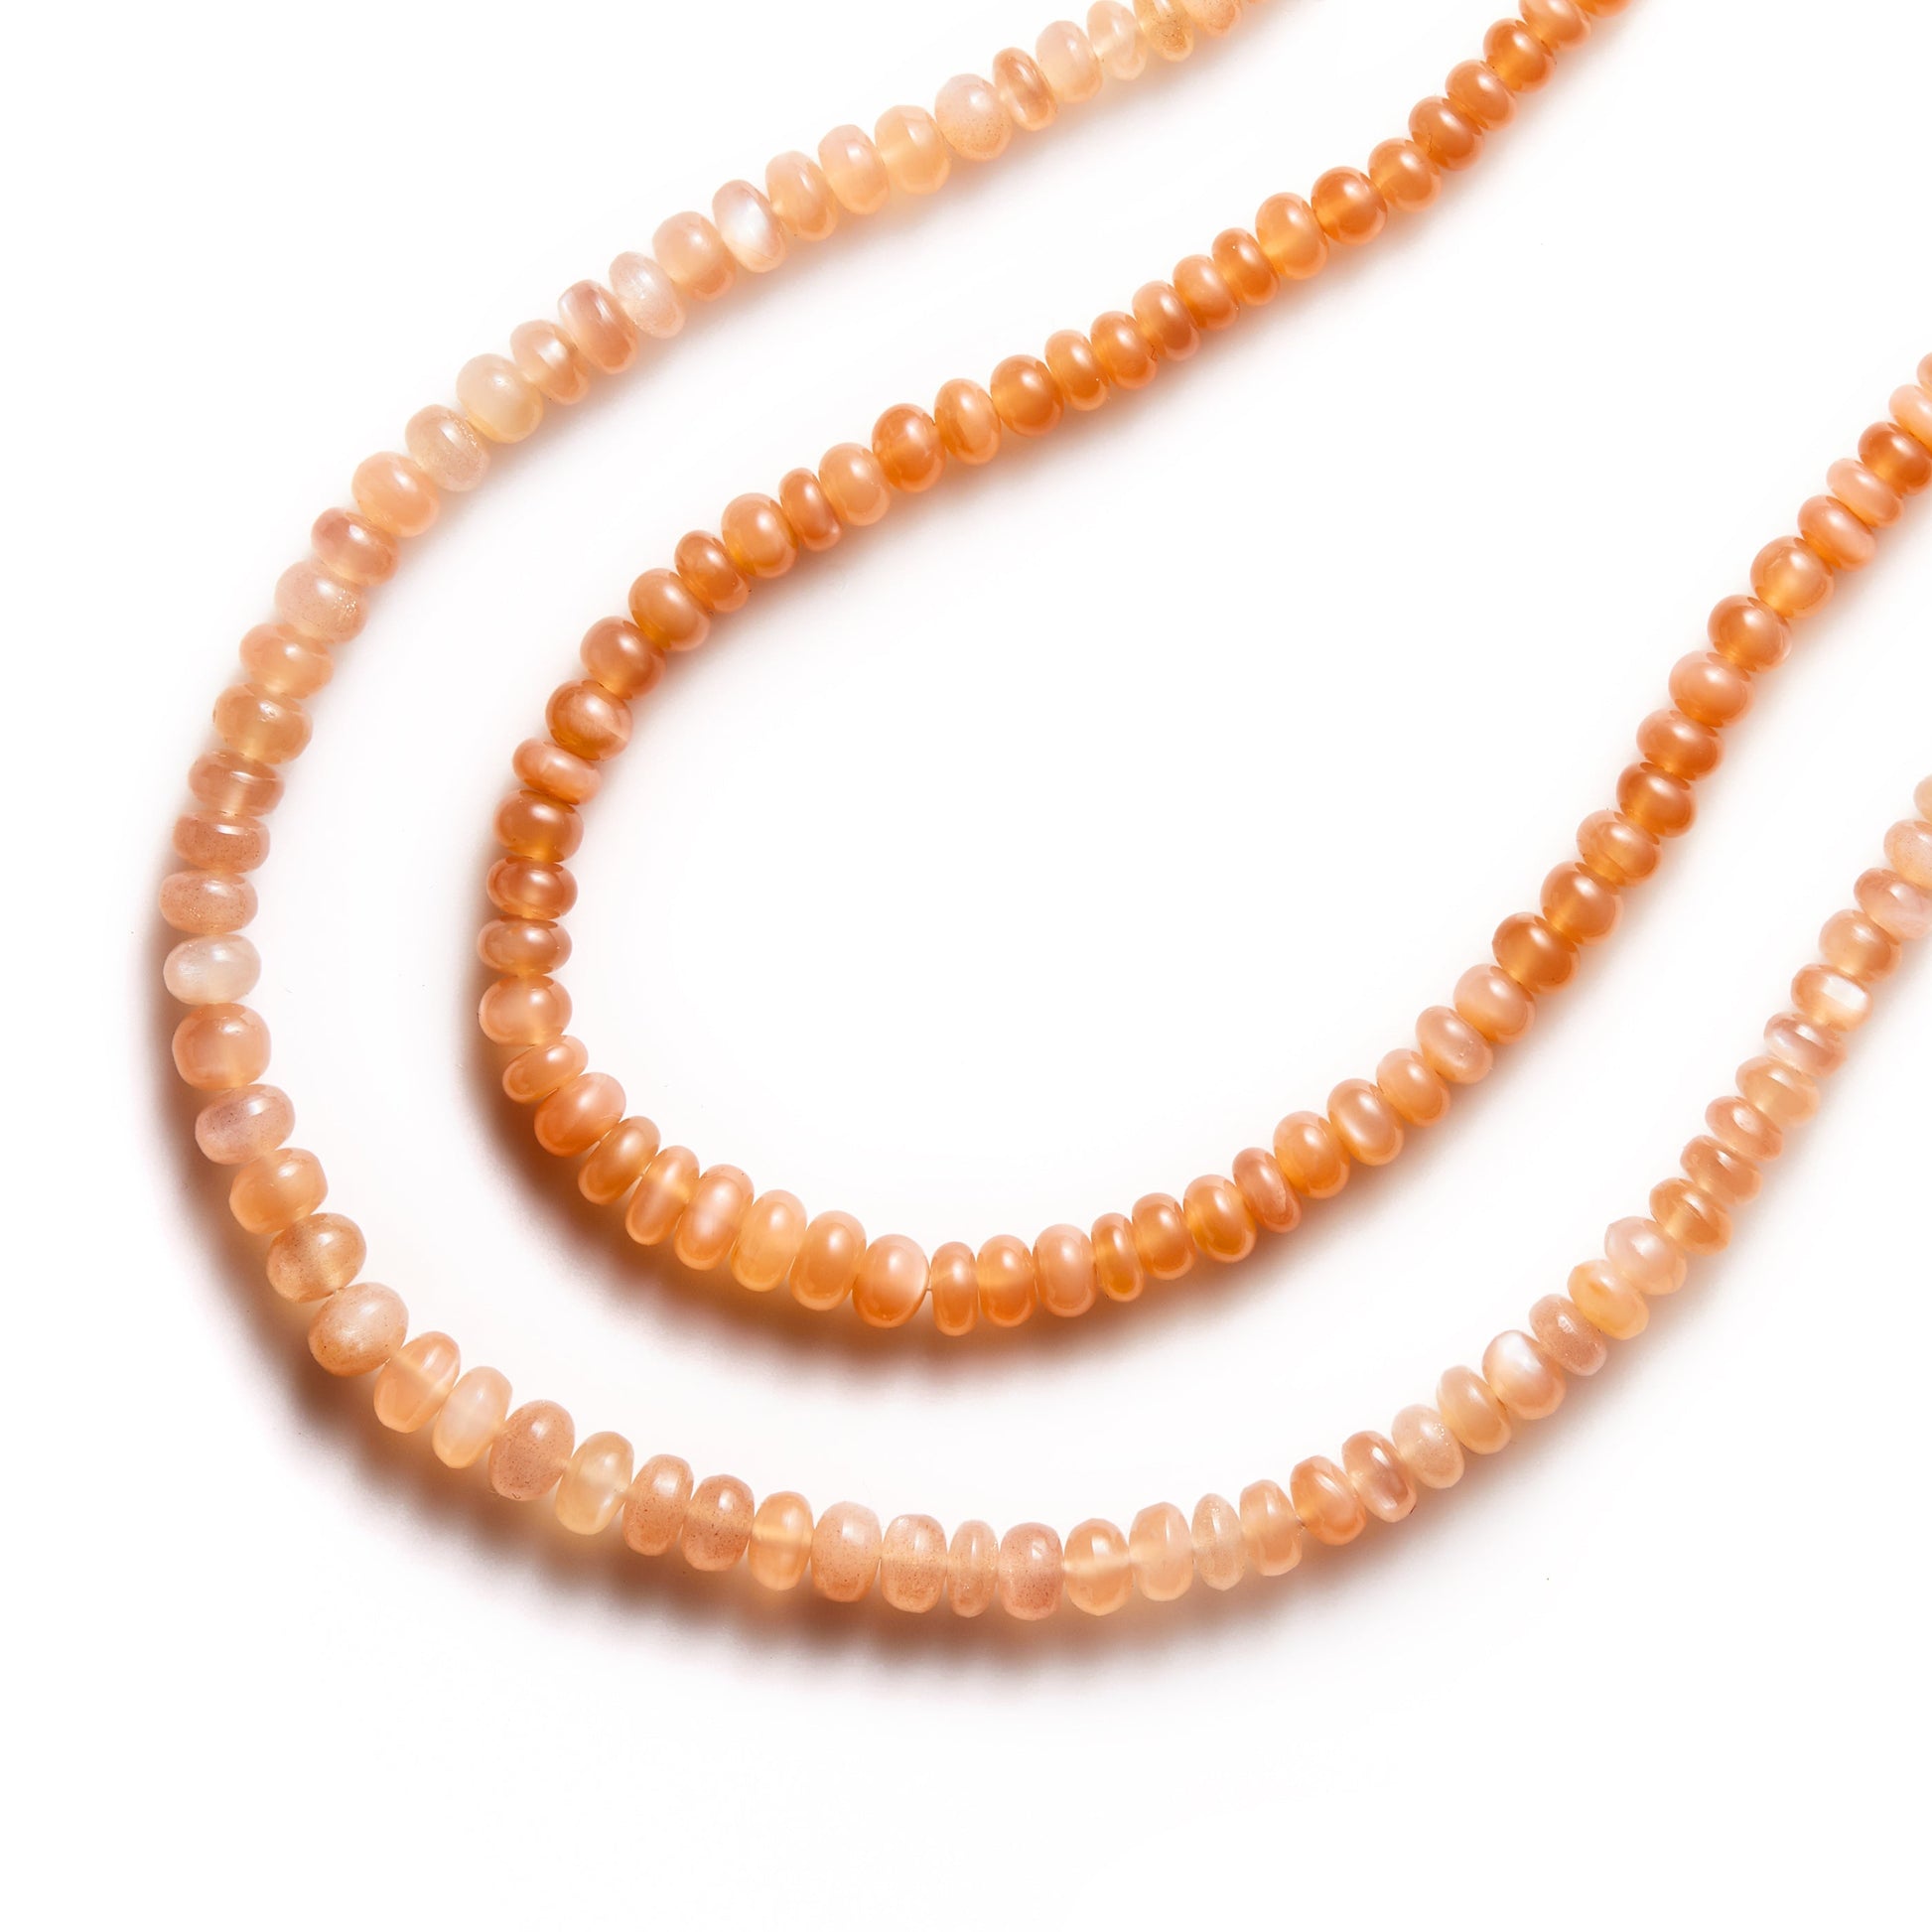 Two crystal healing Peach Moonstone necklaces on a white background for peace and rejuvenation